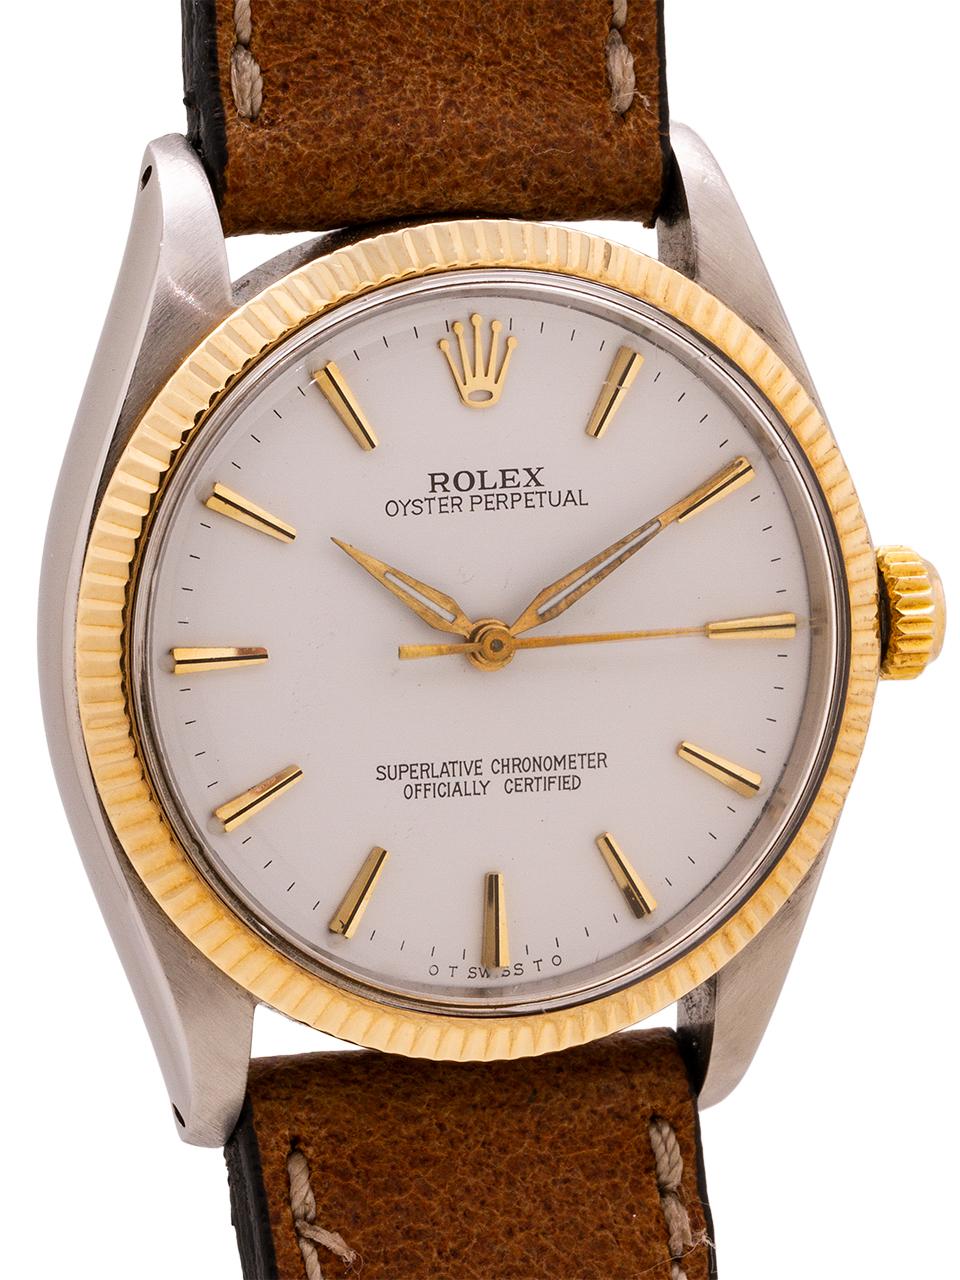 
Rolex Stainless Steel and 14K yellow gold Oyster Perpetual ref 1005 serial #1.6 million circa 1963. Featuring 34mm diameter case with fine engine turned “milled” bezel and acrylic crystal. With professionally refinished white dial, with applied